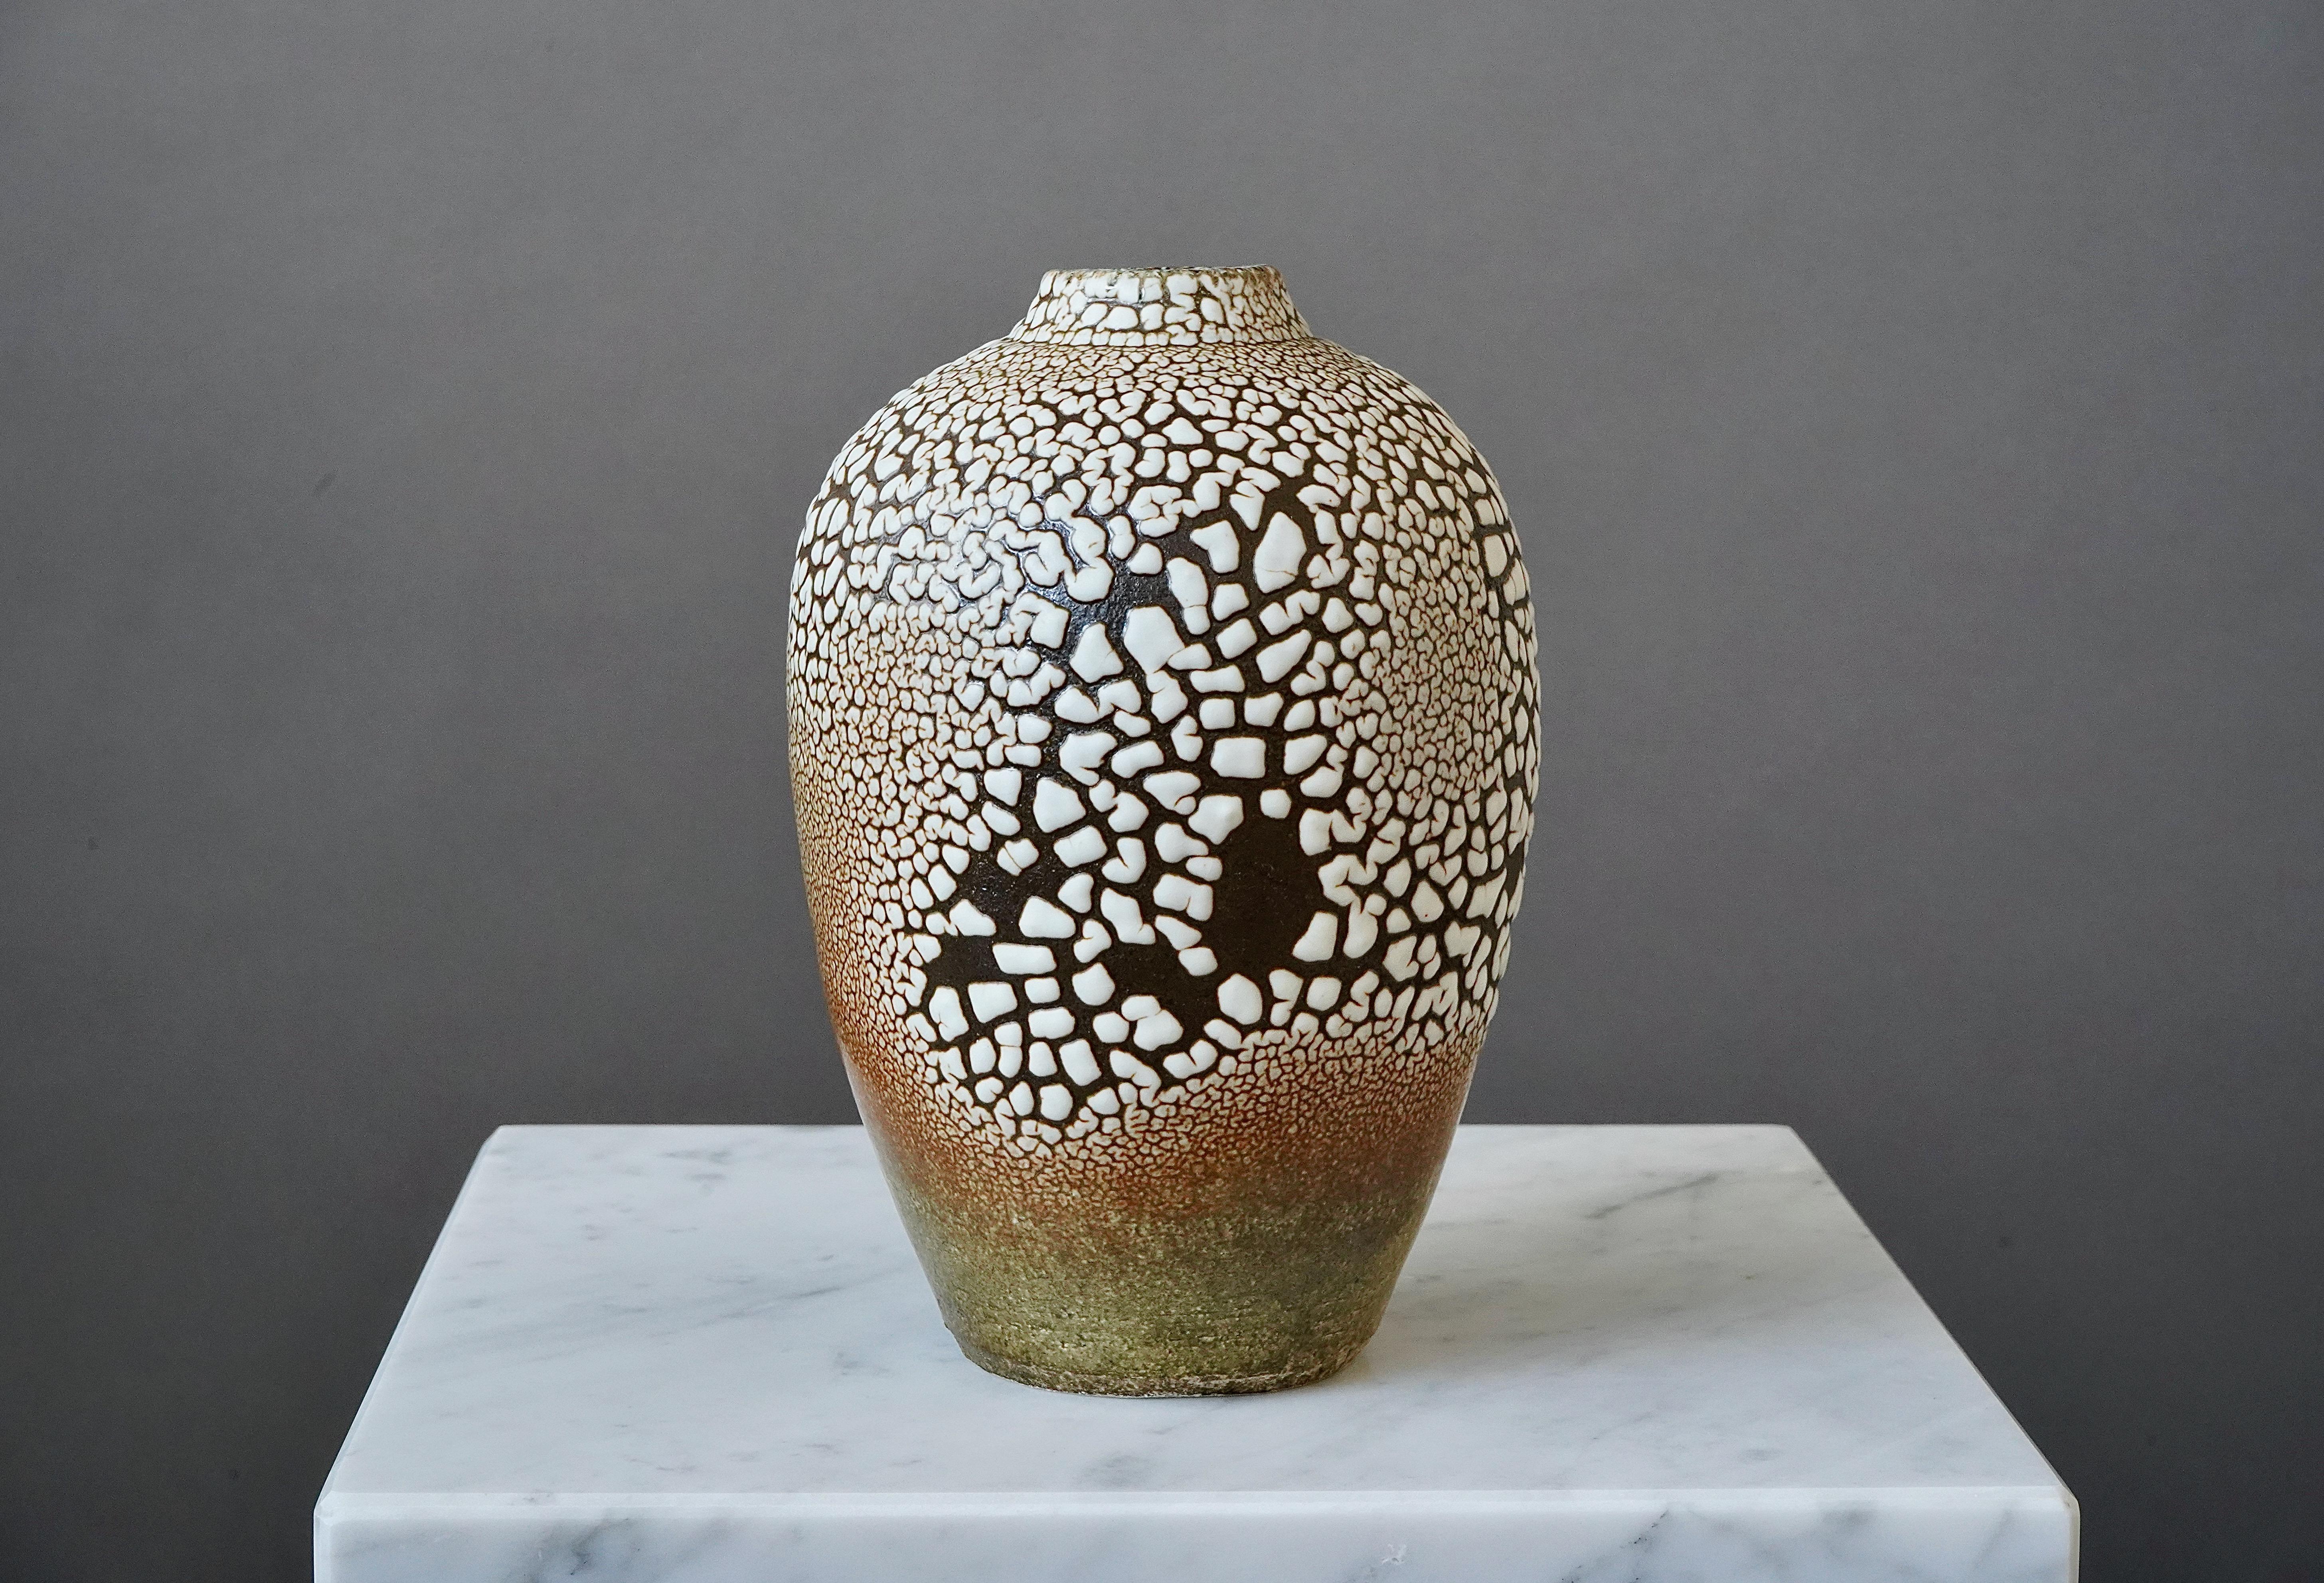 A beautiful and unique stoneware vase with amazing glaze. 
Made by Swedish ceramist Rune Bergman in his studio in Simrishamn, Sweden.

Excellent condition. Signed 'RB'.